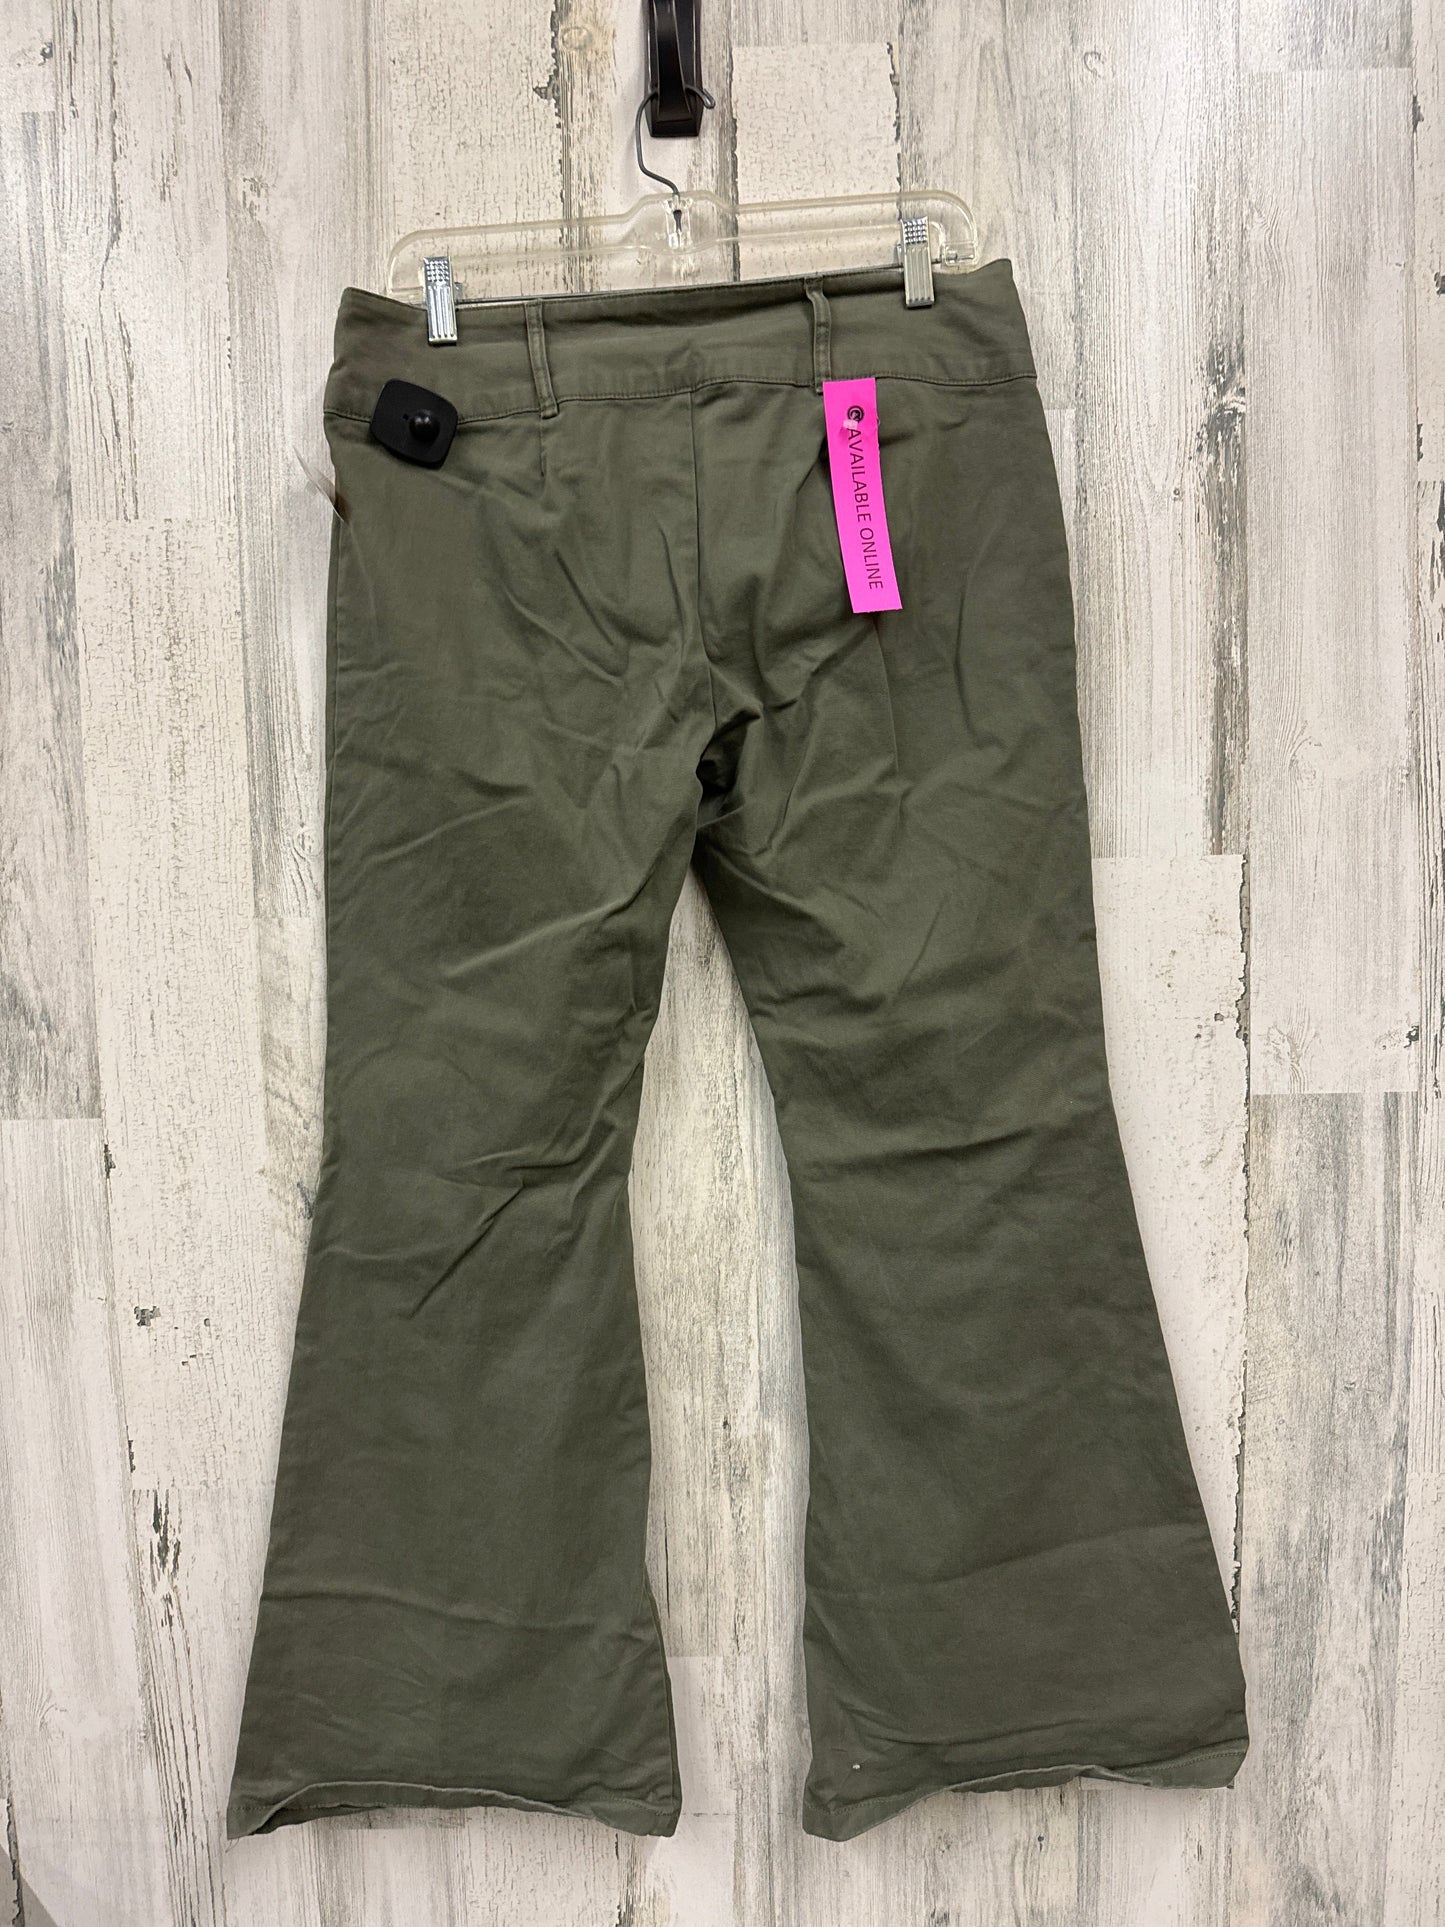 Pants Cargo & Utility By Wild Fable  Size: 8